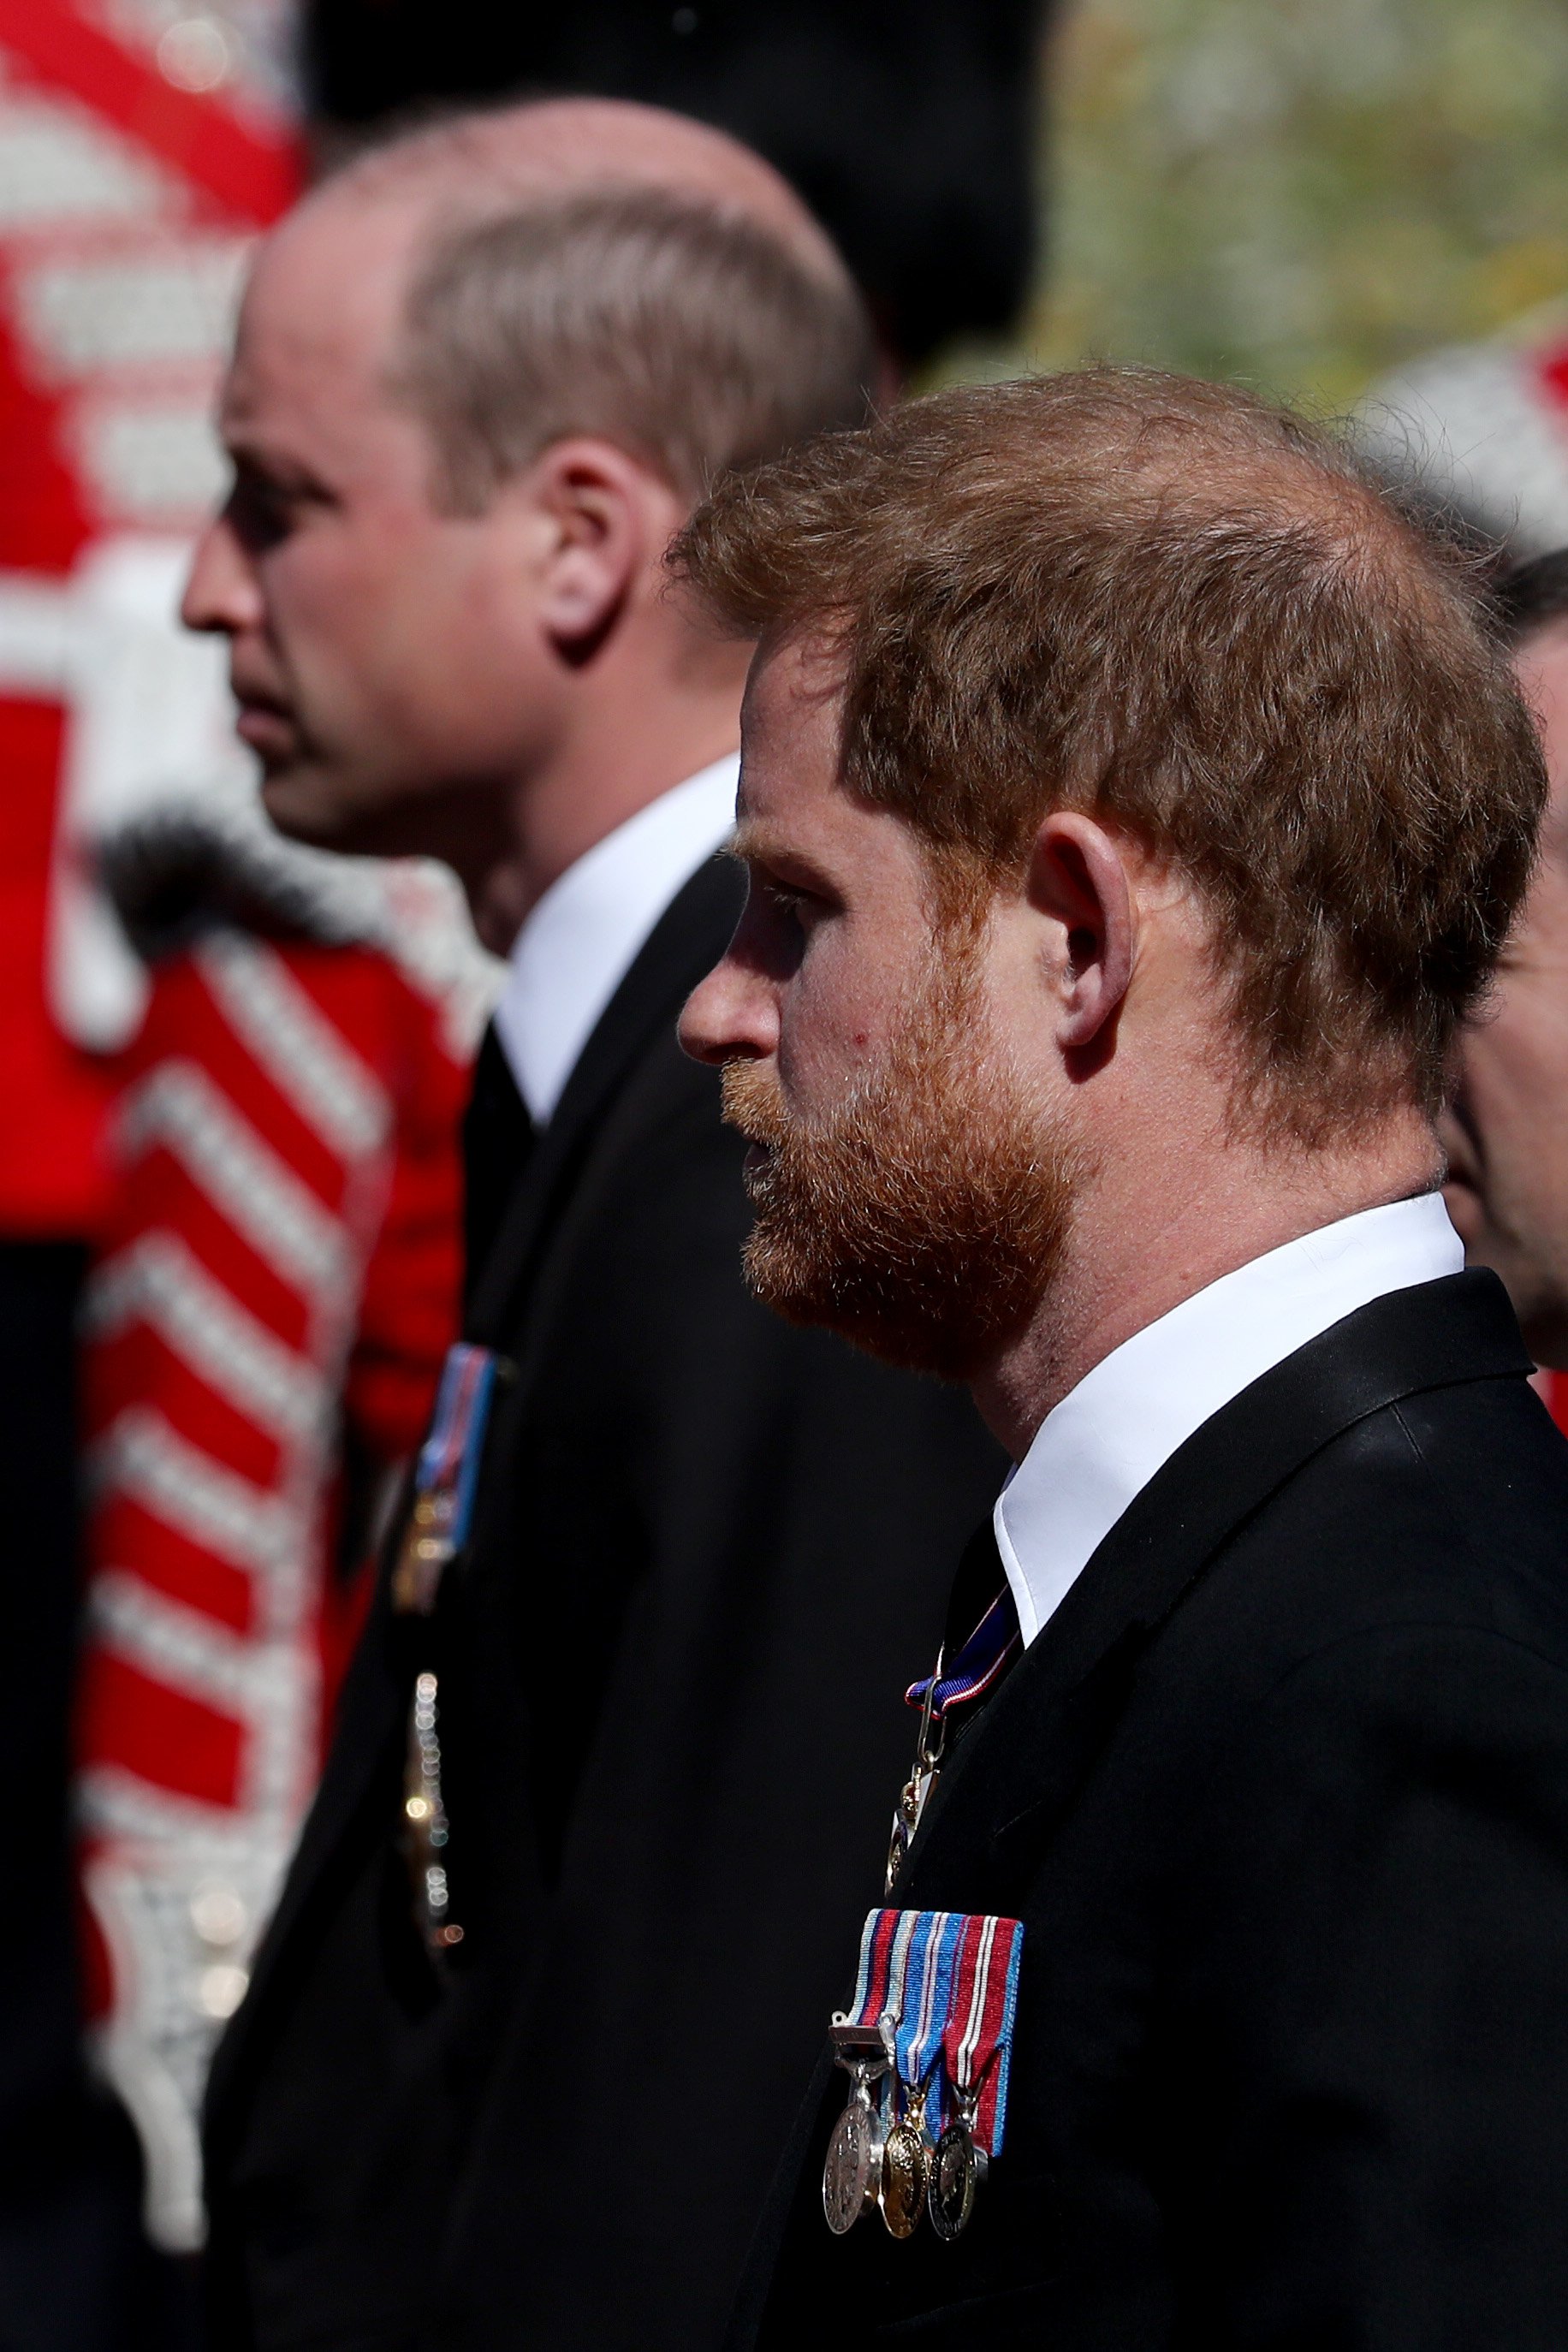 Prince William and Prince Harry during the funeral of Prince Philip at Windsor Castle on April 17, 2021 in Windsor, England. / Source: Getty Images